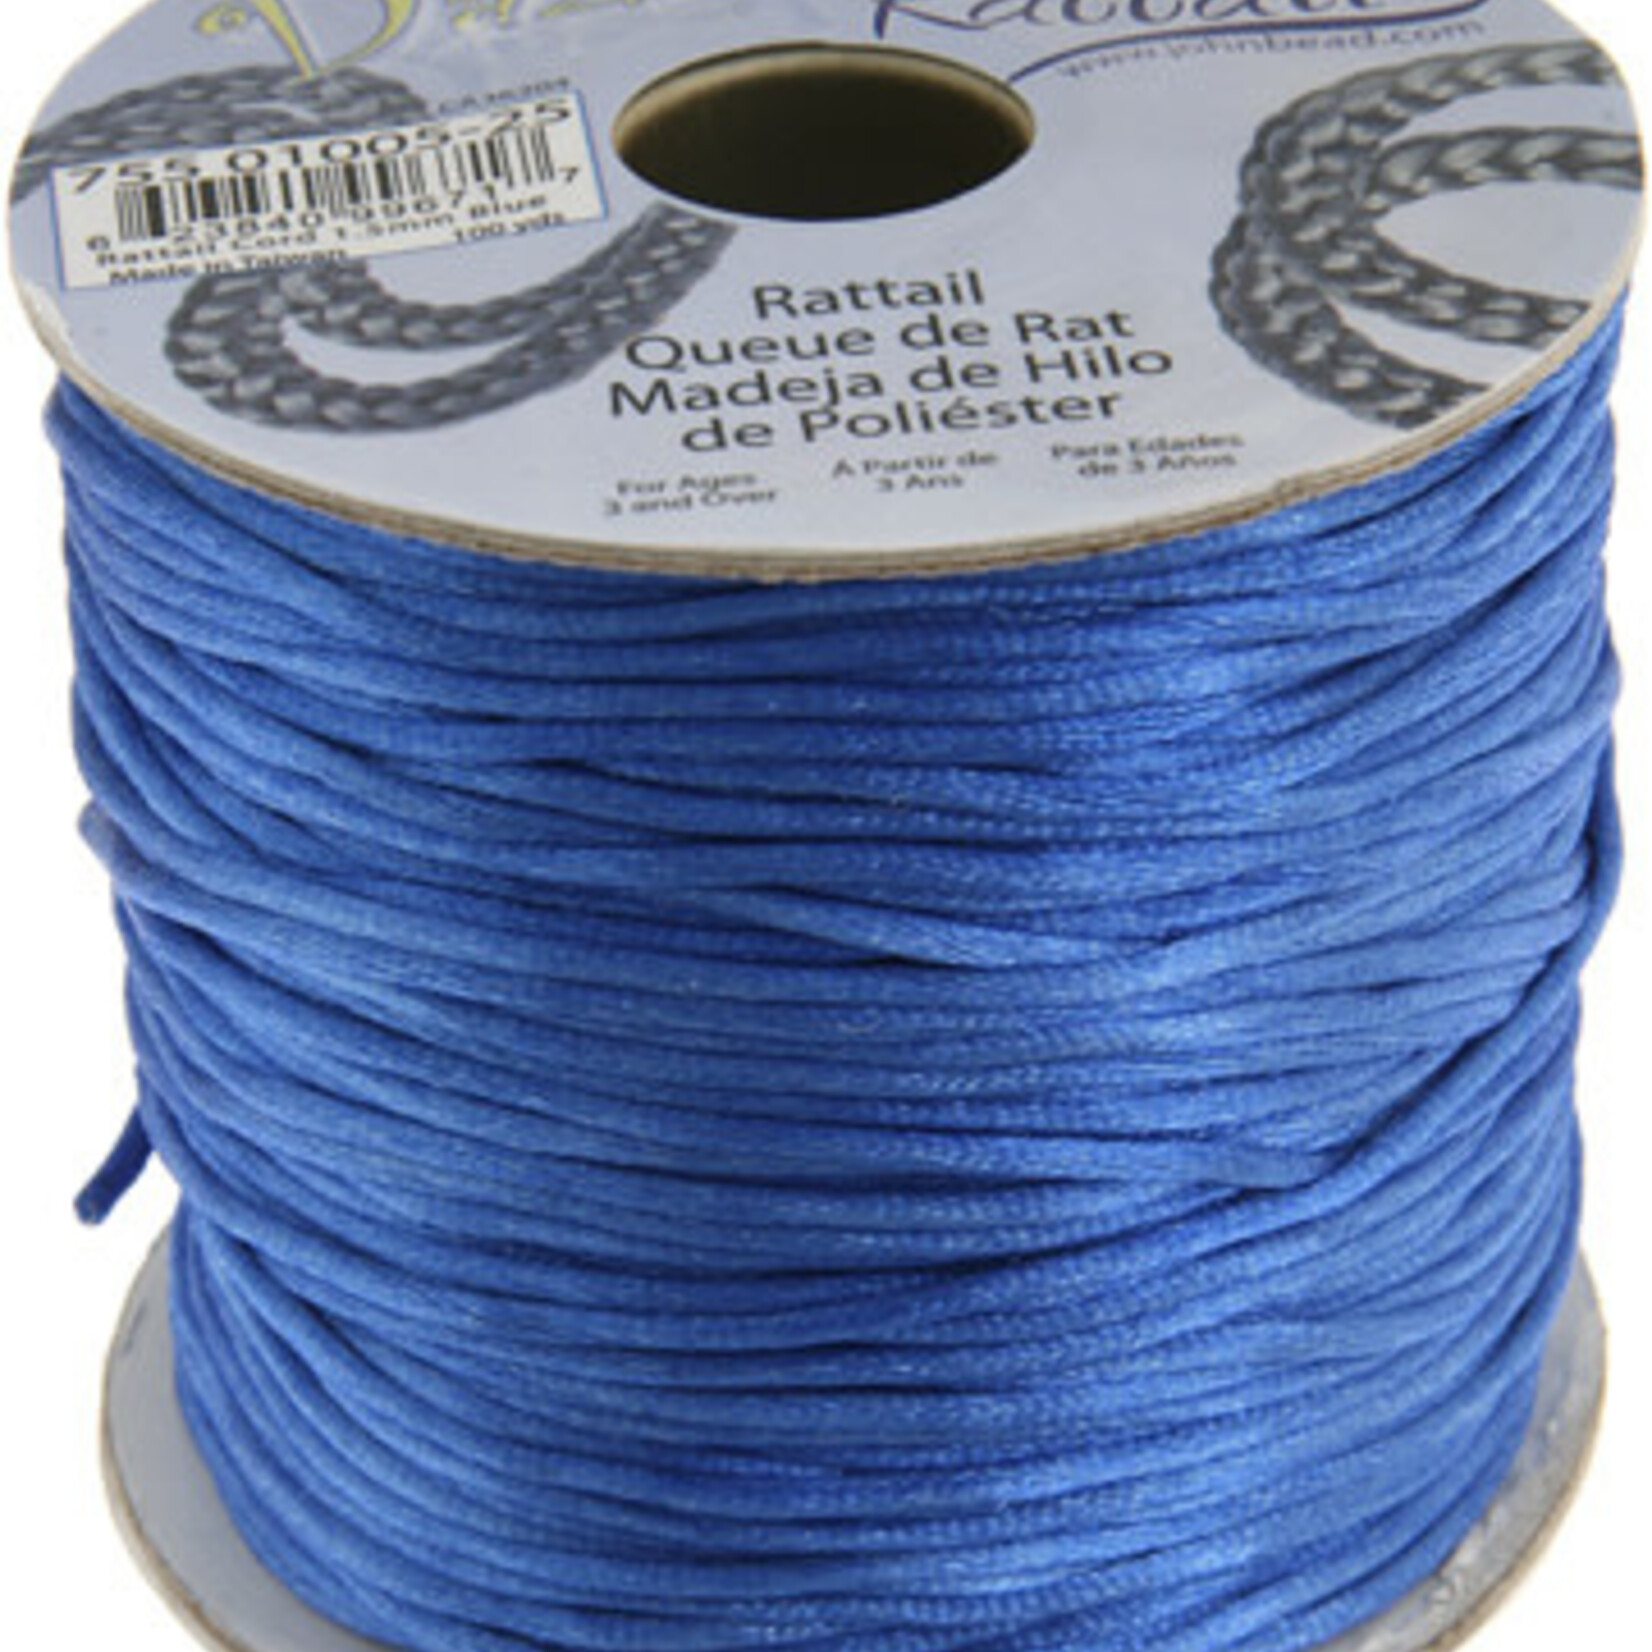 Rattail Cord 1.5mm (100 yards)  Blue